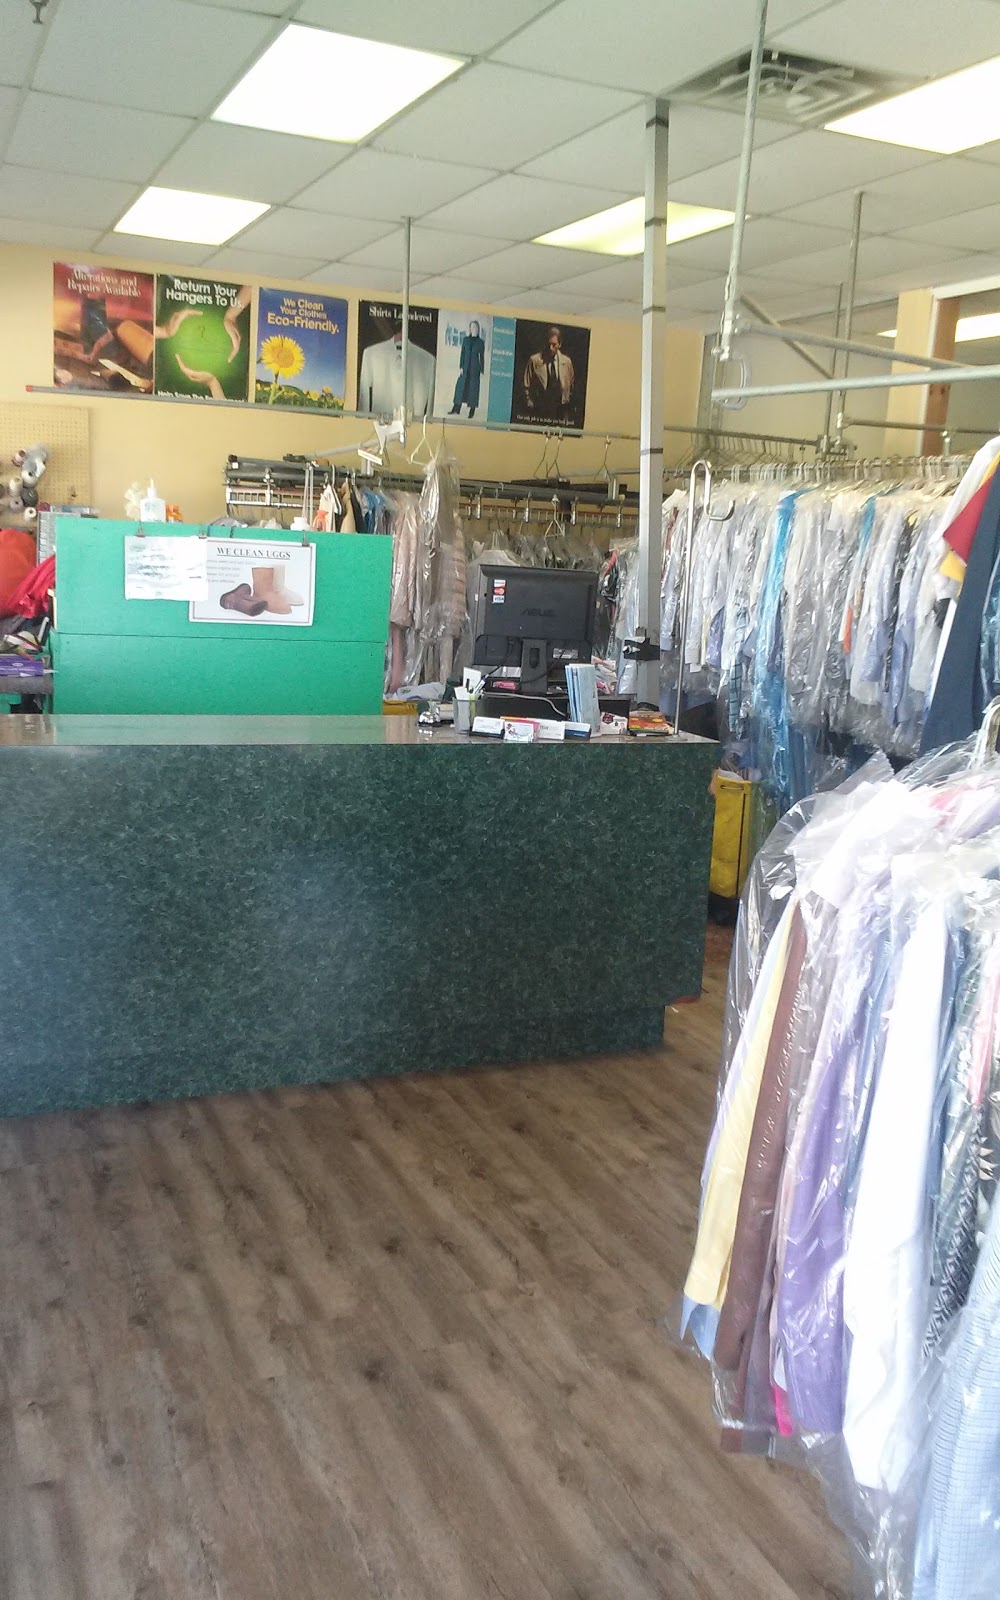 Echo Dry Cleaners | 309 Fries Mill Rd, Sewell, NJ 08080 | Phone: (856) 582-8955